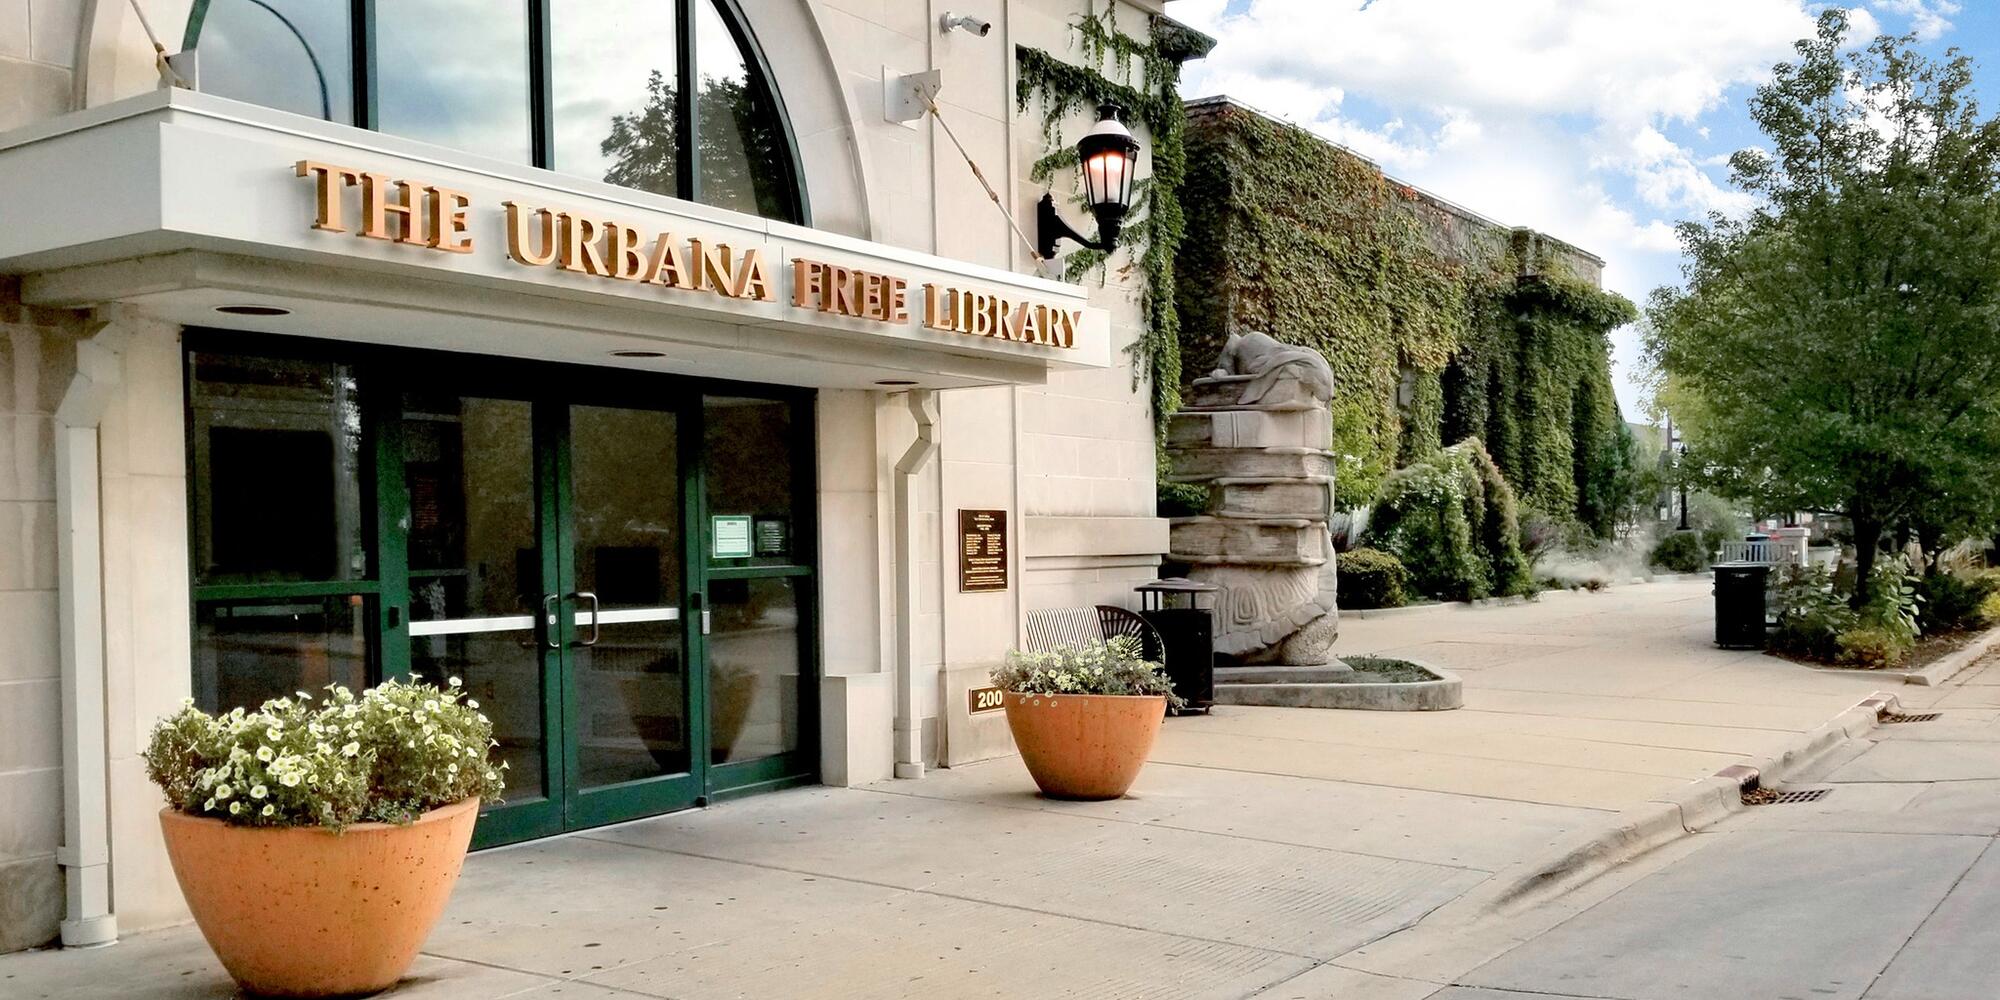 Image of the front entrance to the Urbana Free Library.